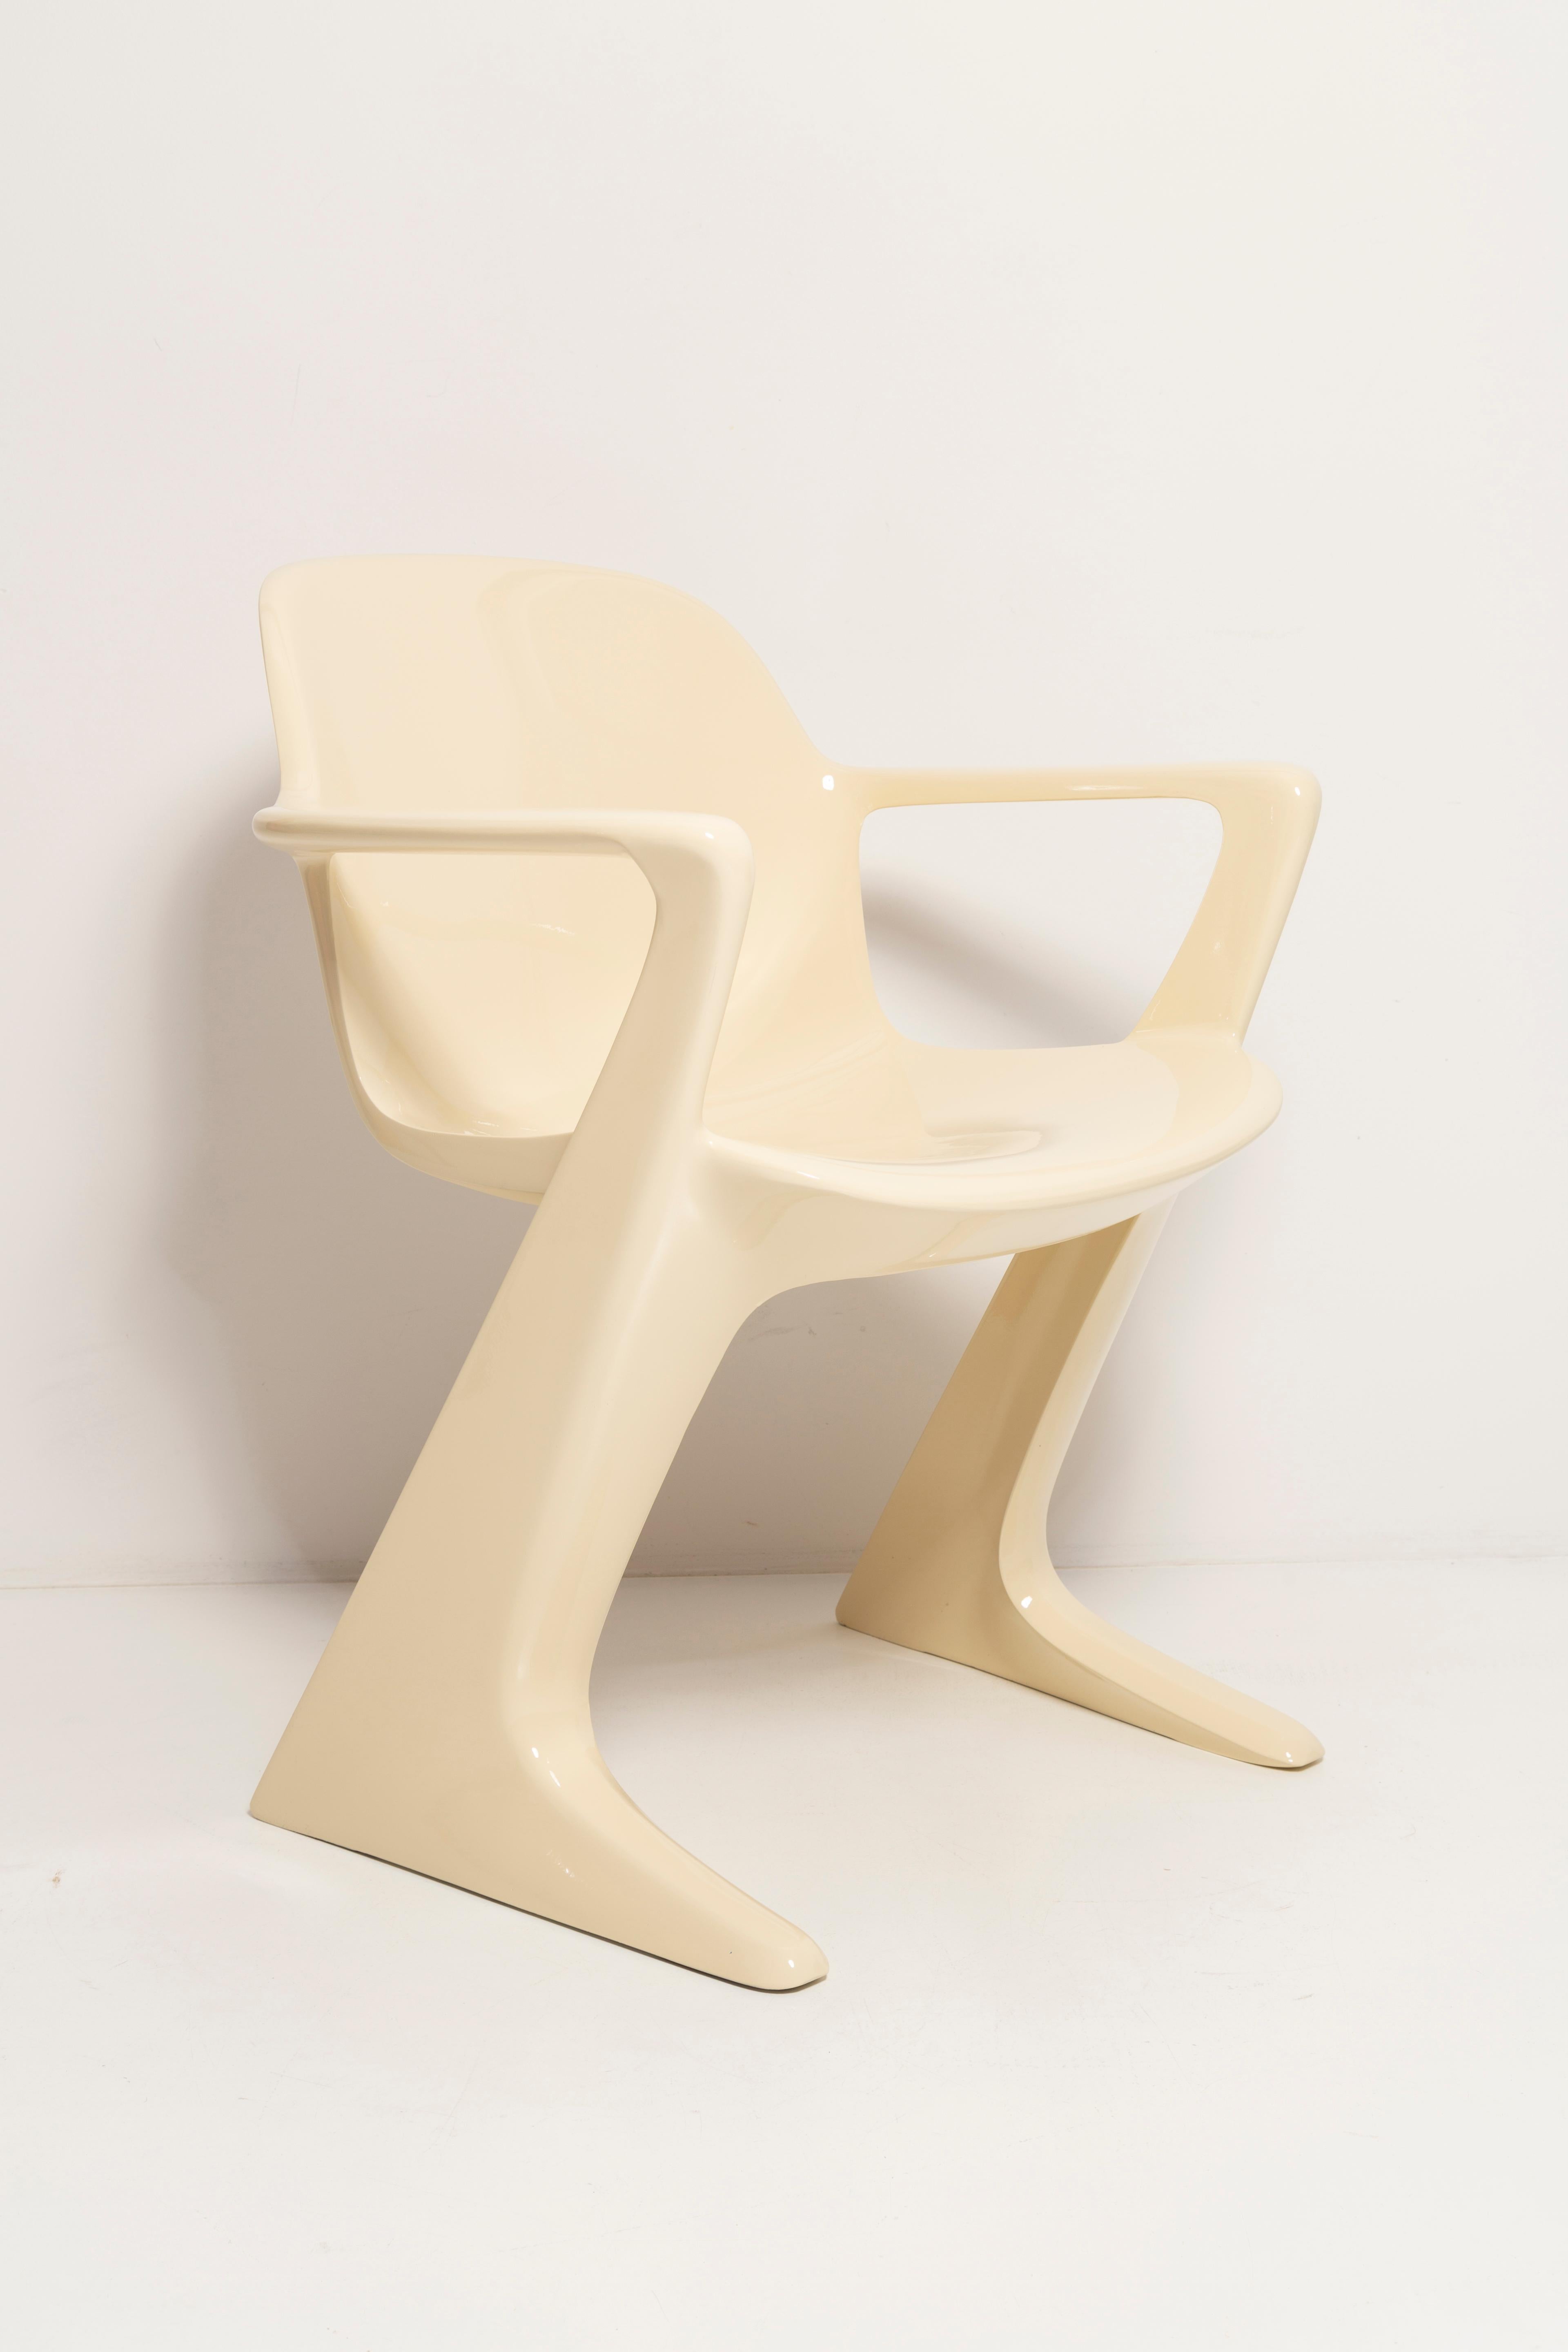 20th Century Pair of Mid-Century Light Beige Kangaroo Chairs, Ernst Moeckl, Germany, 1968 For Sale